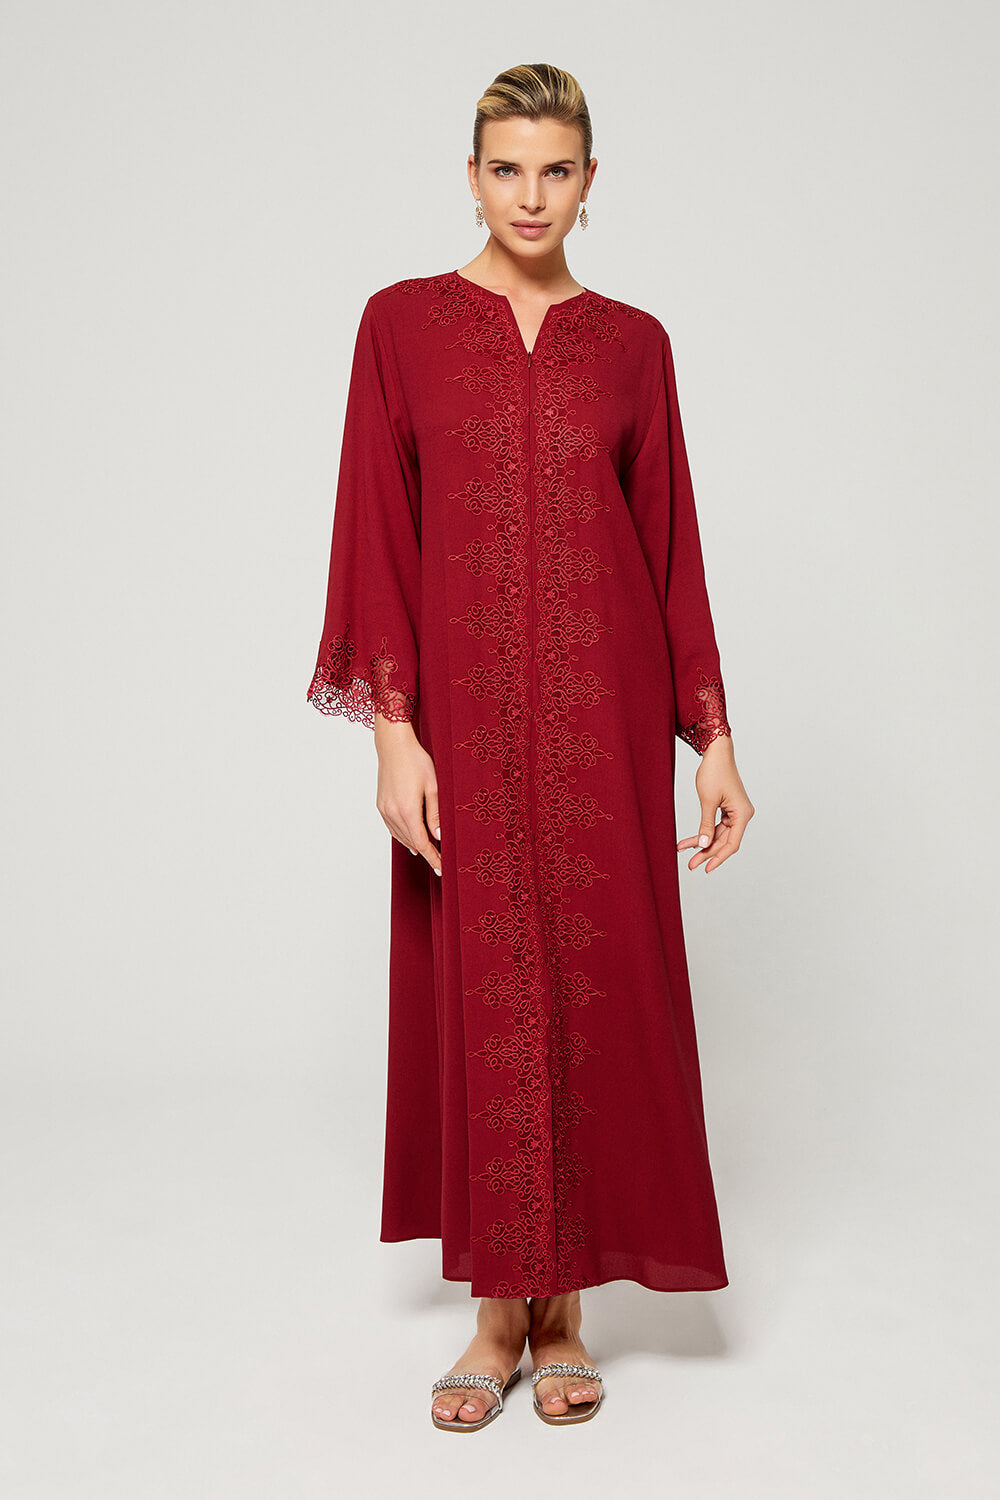 Carmine - Luxury Trimmed Rayon Crepe Full Length Dress with Zipper - Bordeaux Red